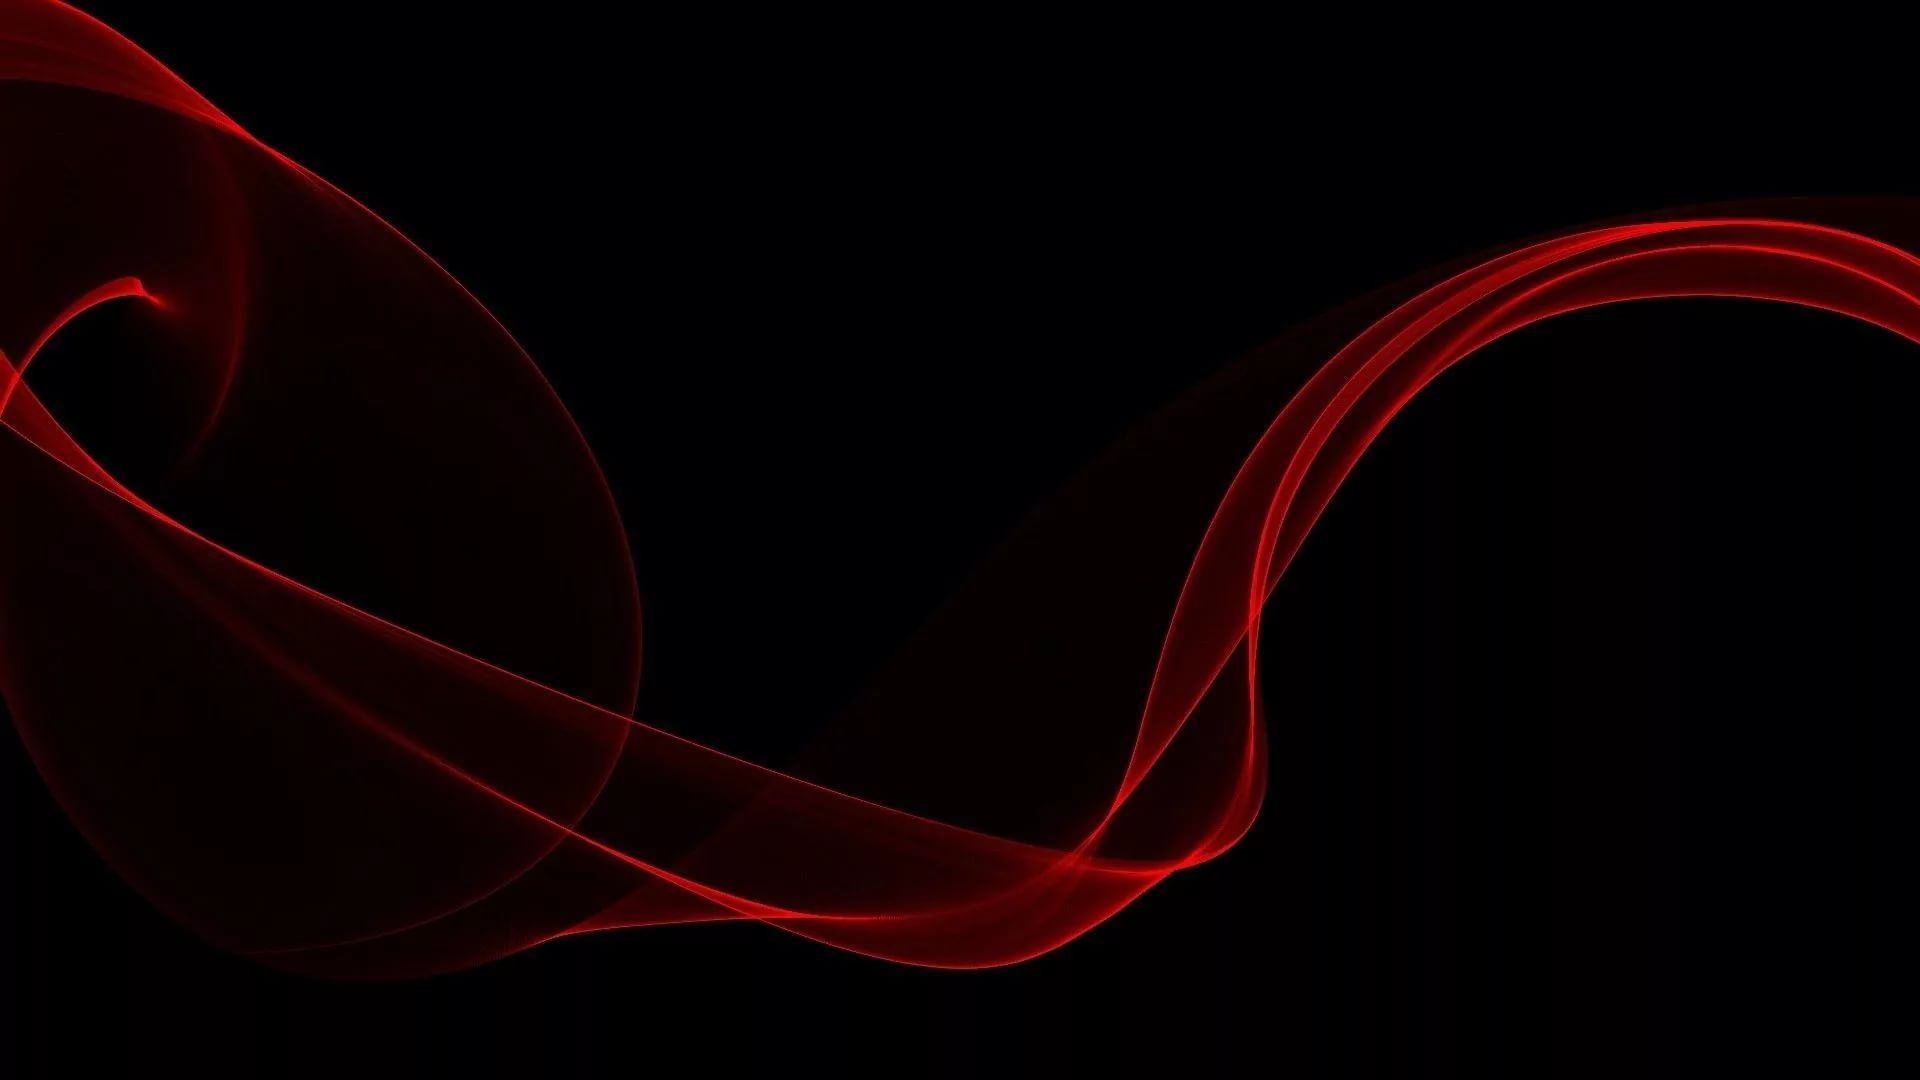 Black And Red Wallpaper Image